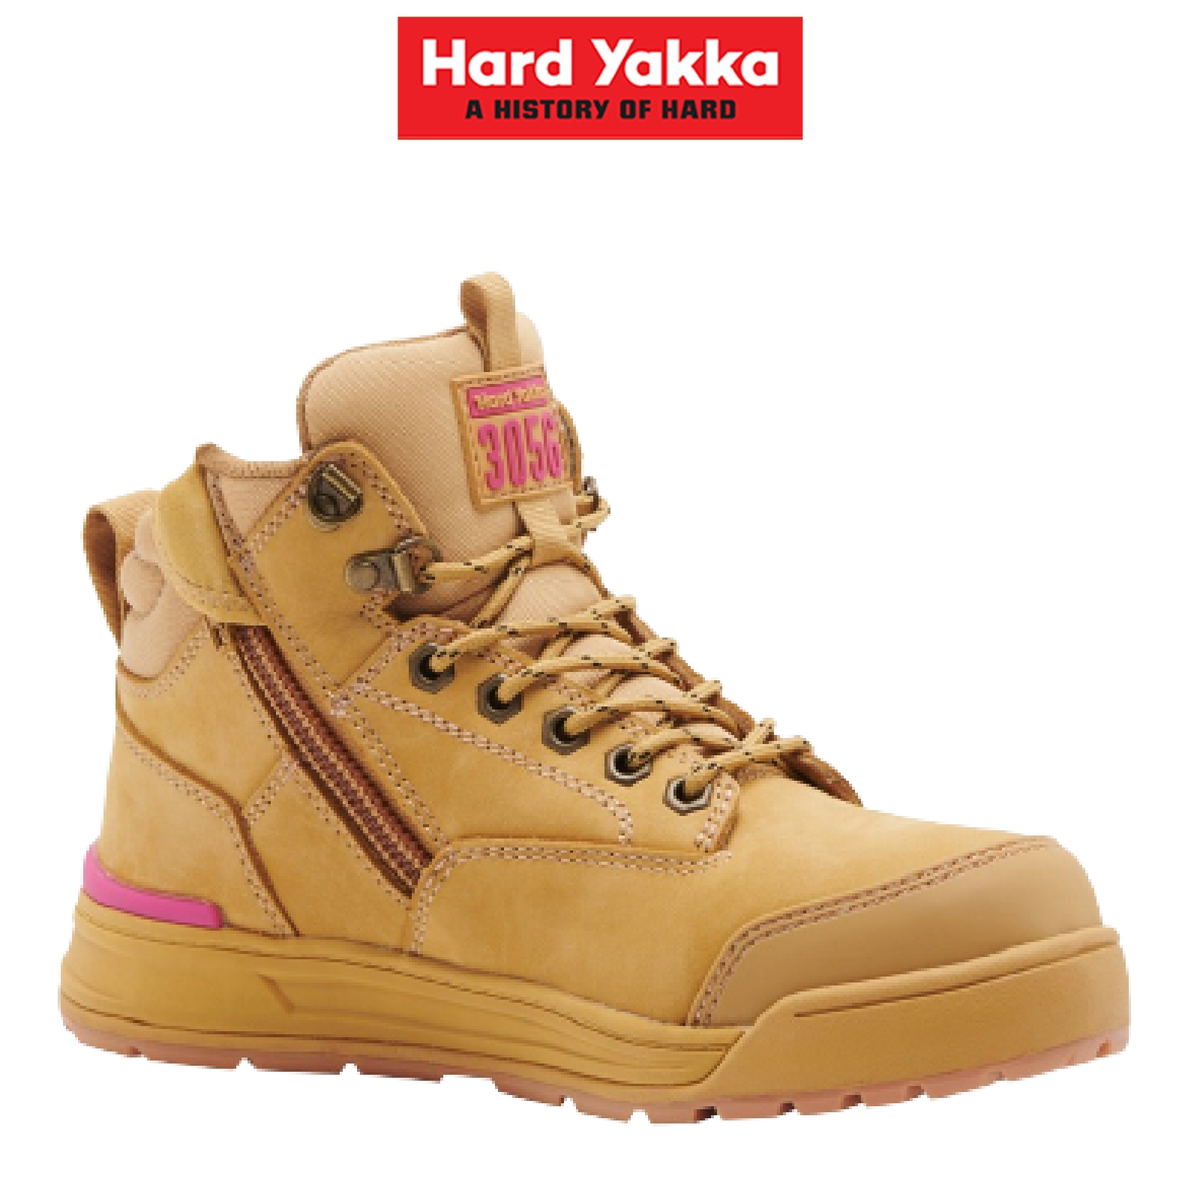 Hard Yakka Womens 3056 Boots Water Resistant Leather Work Safety Pink Y60240